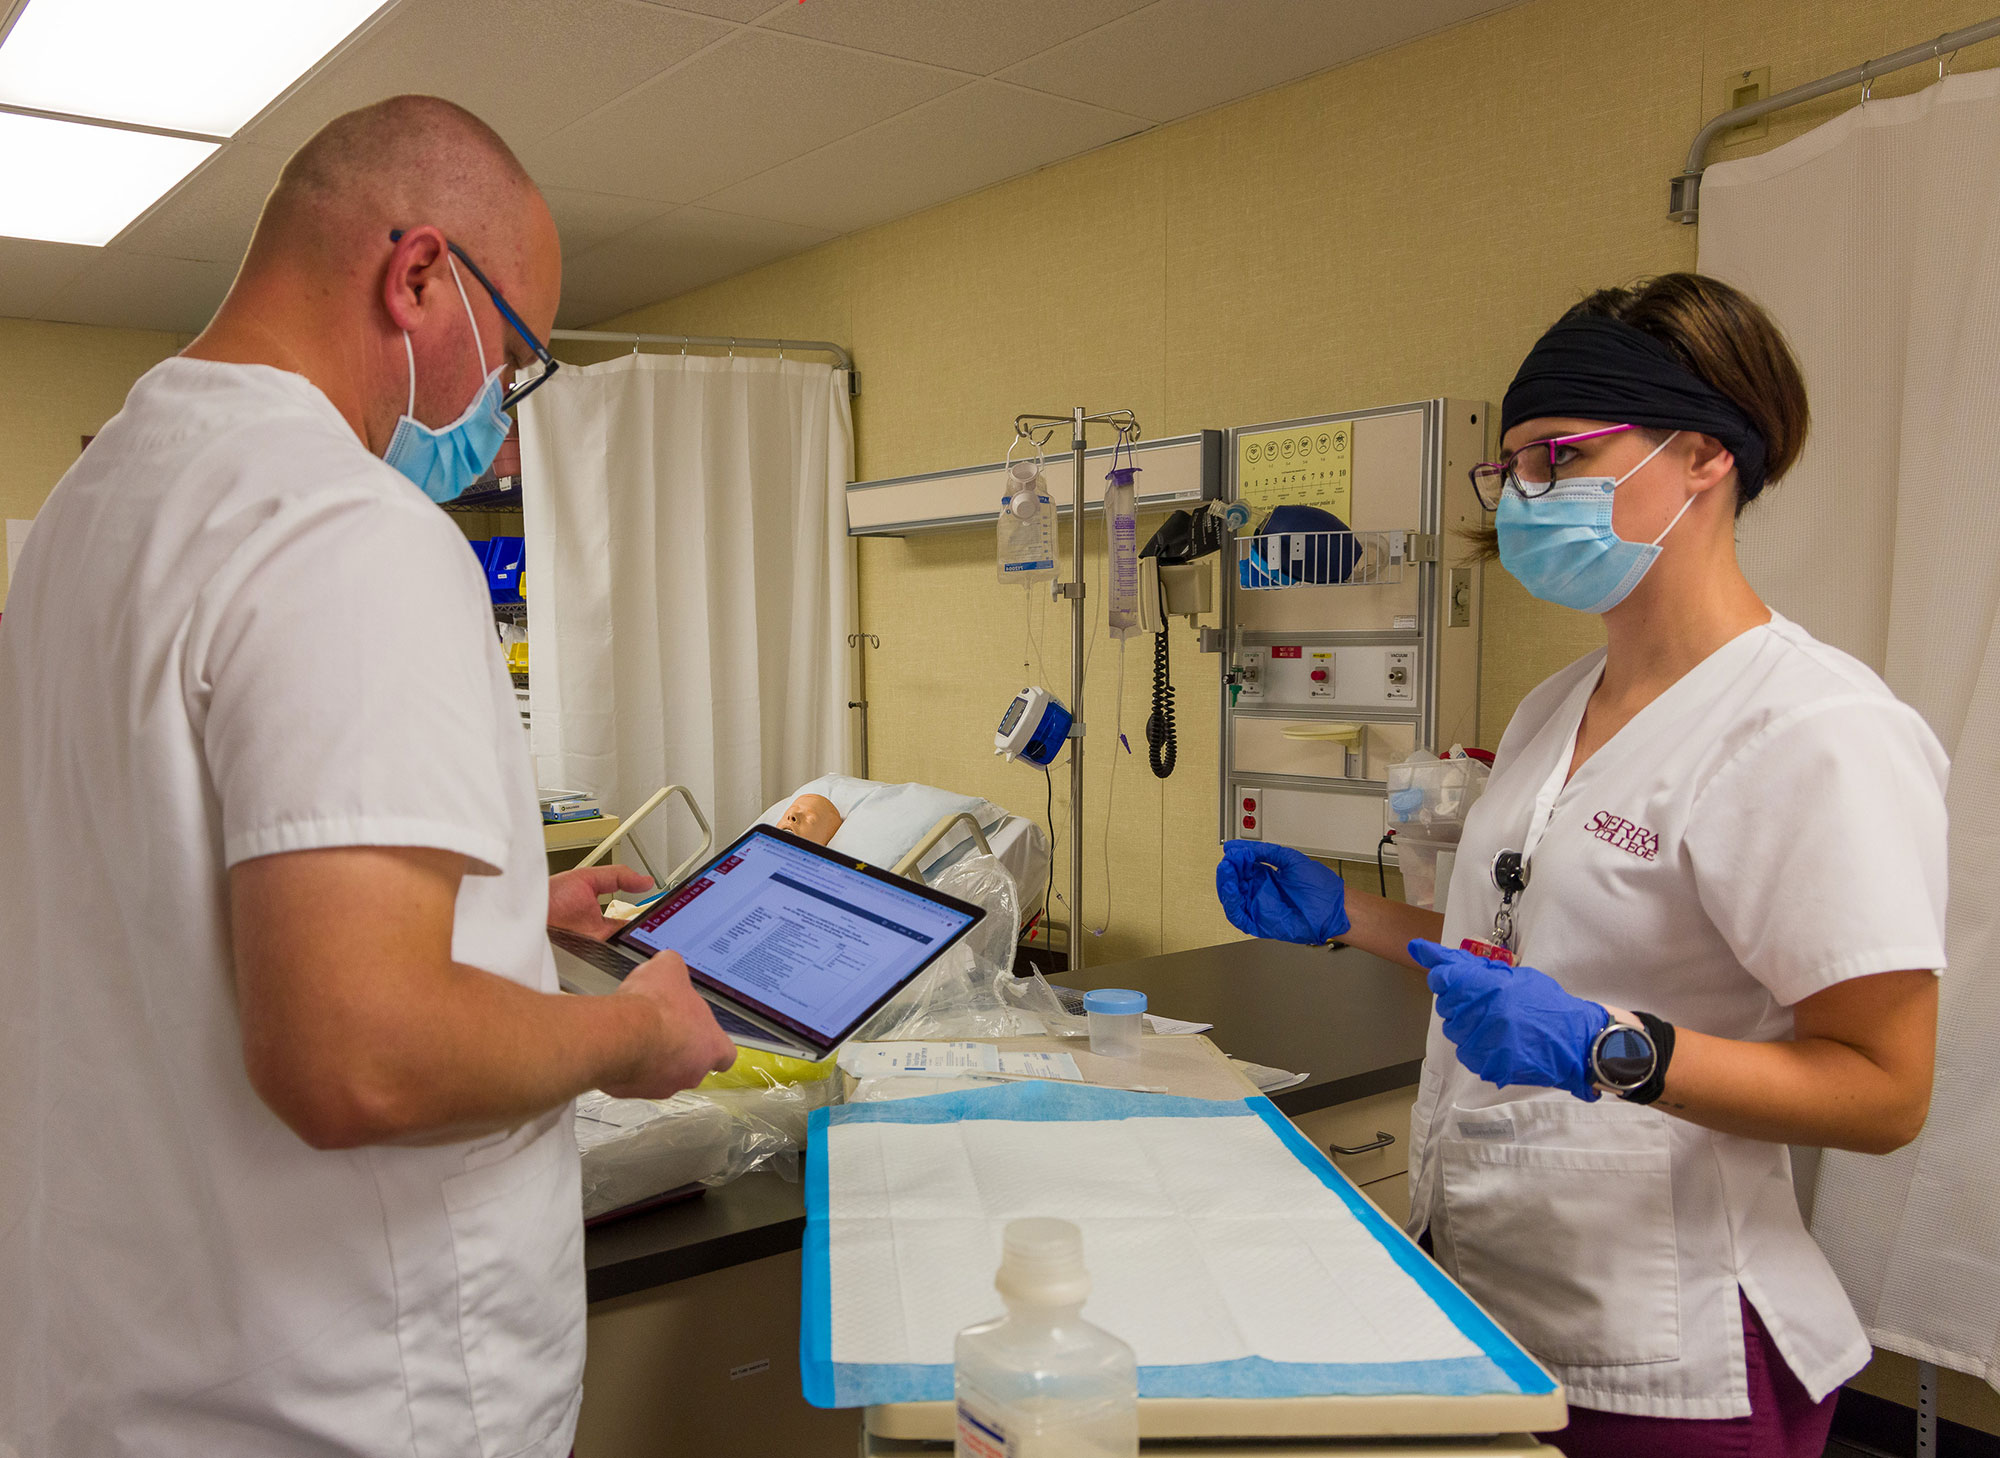 Male student enters clinical information into tablet as female student observes.